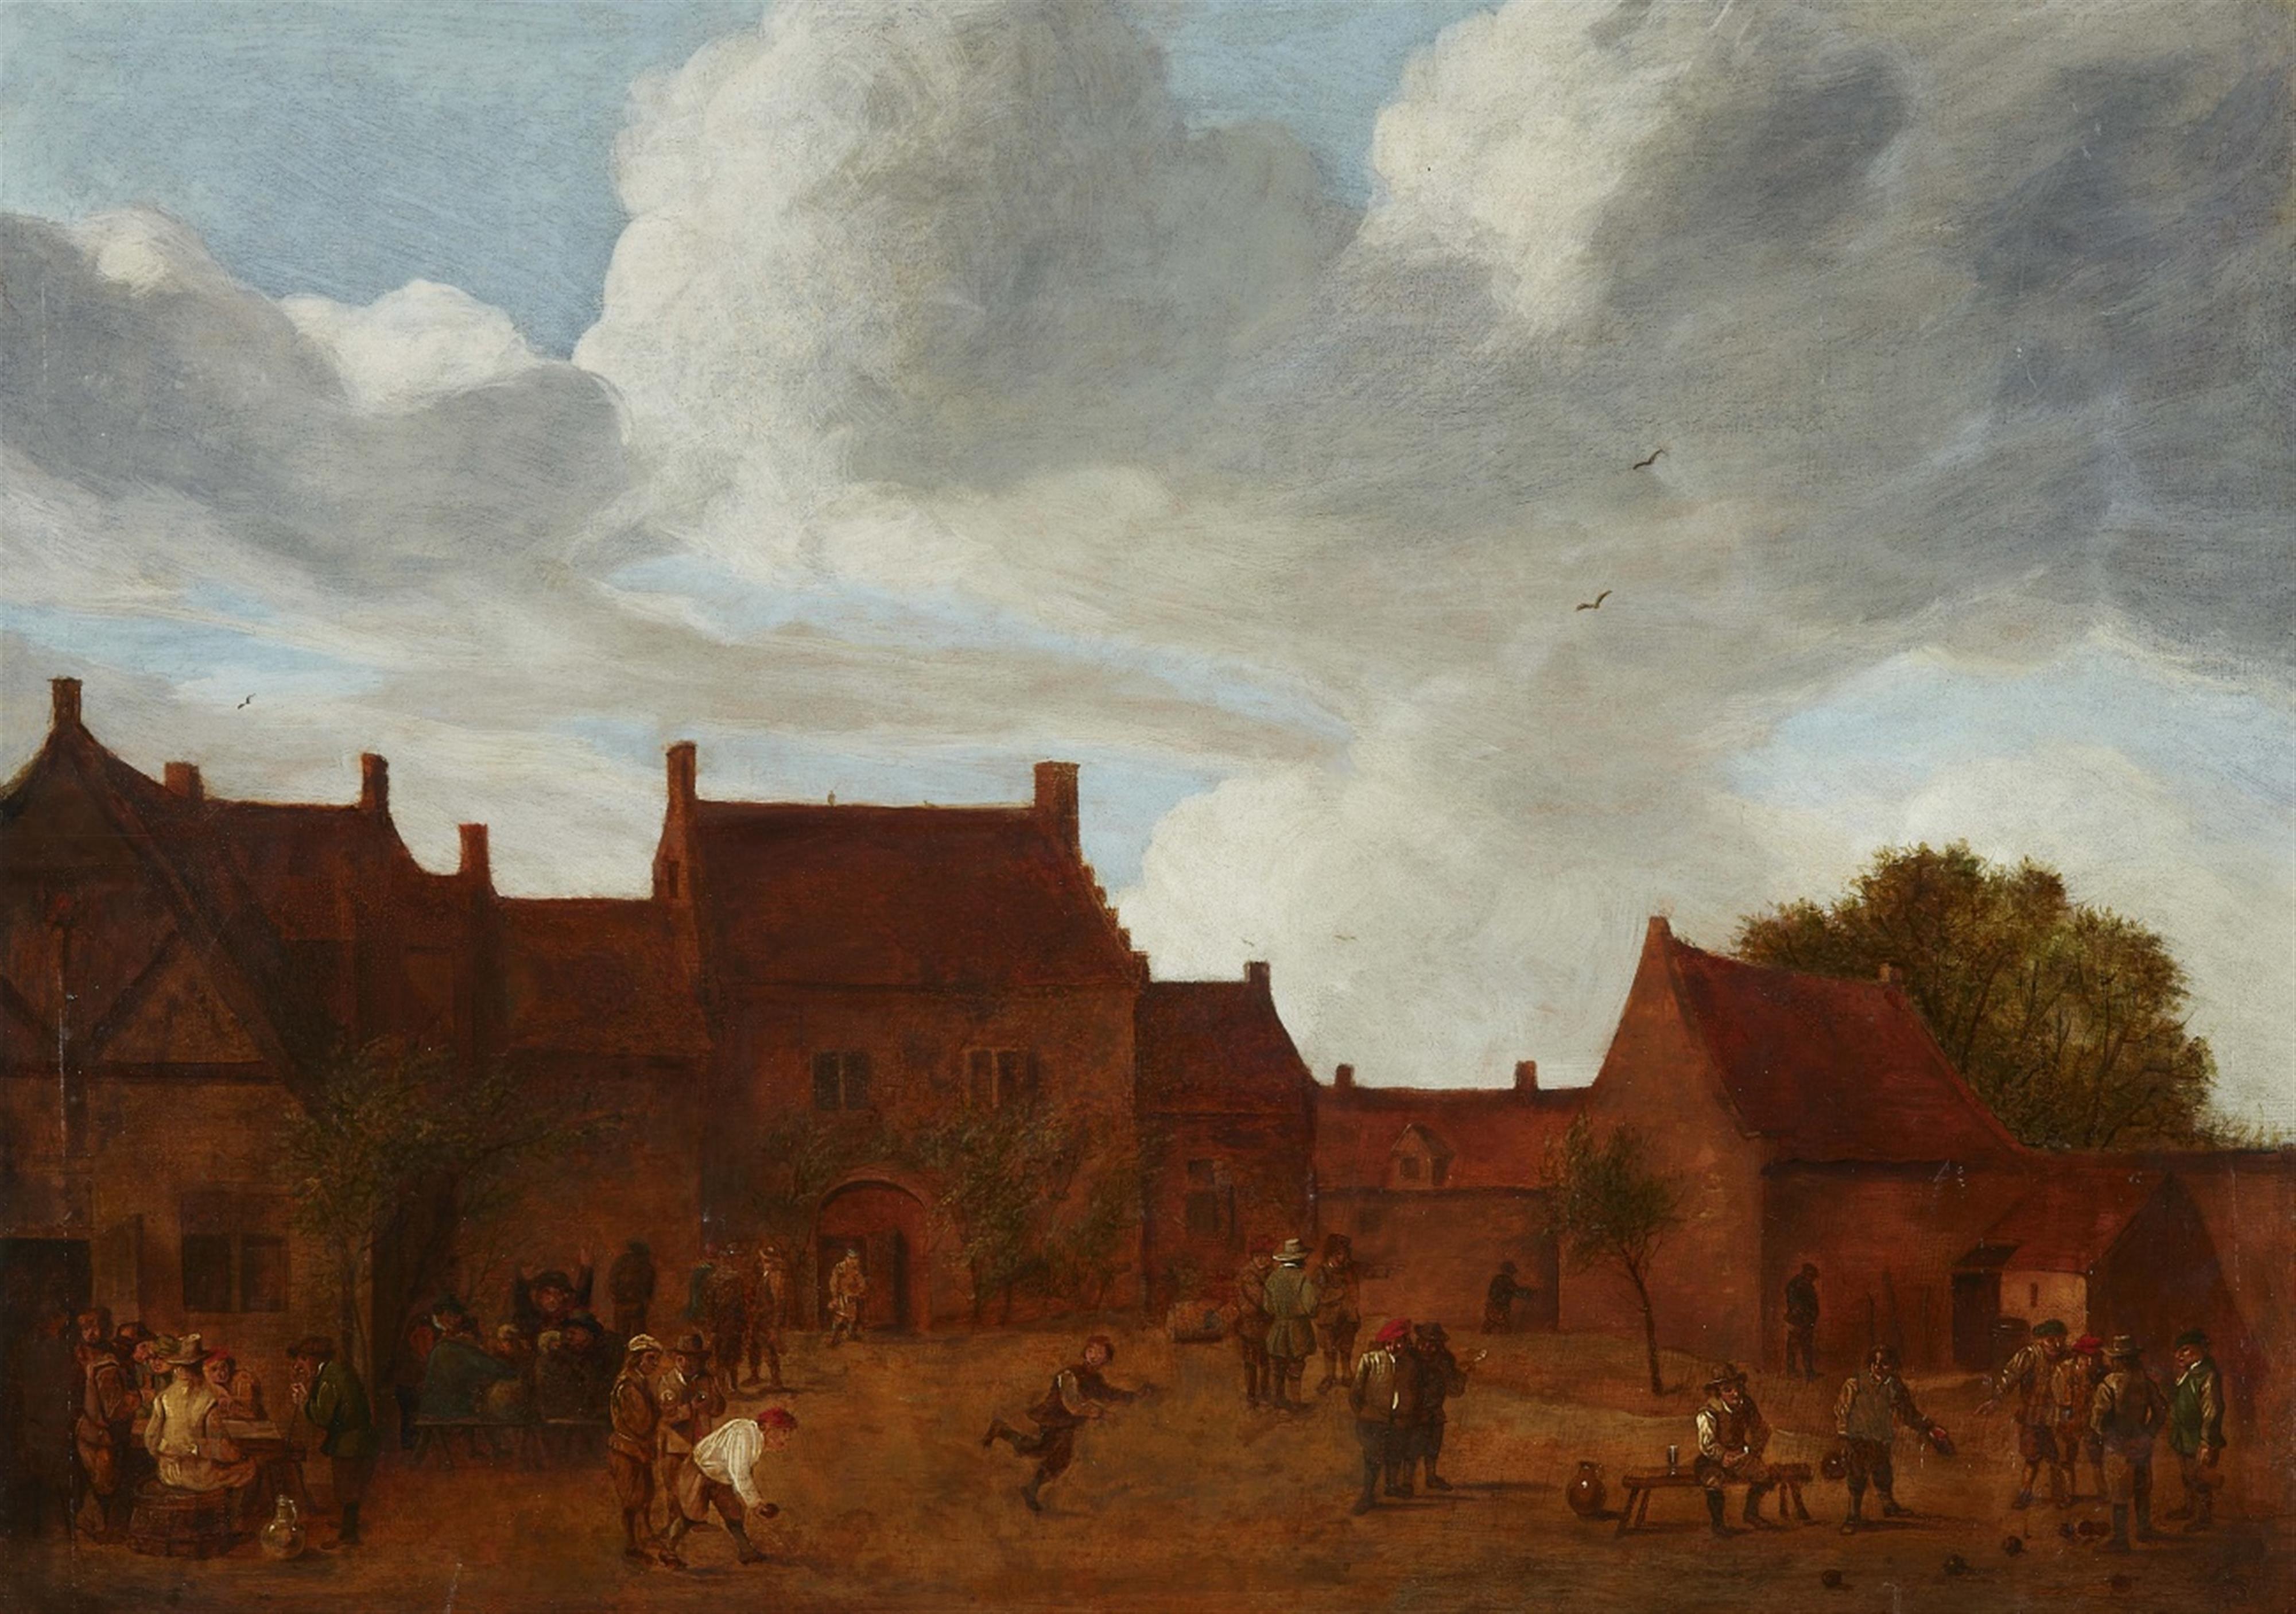 David Teniers the Younger, follower of - Peasants Drinking and Playing Boccia Outside a Farmhouse - image-1